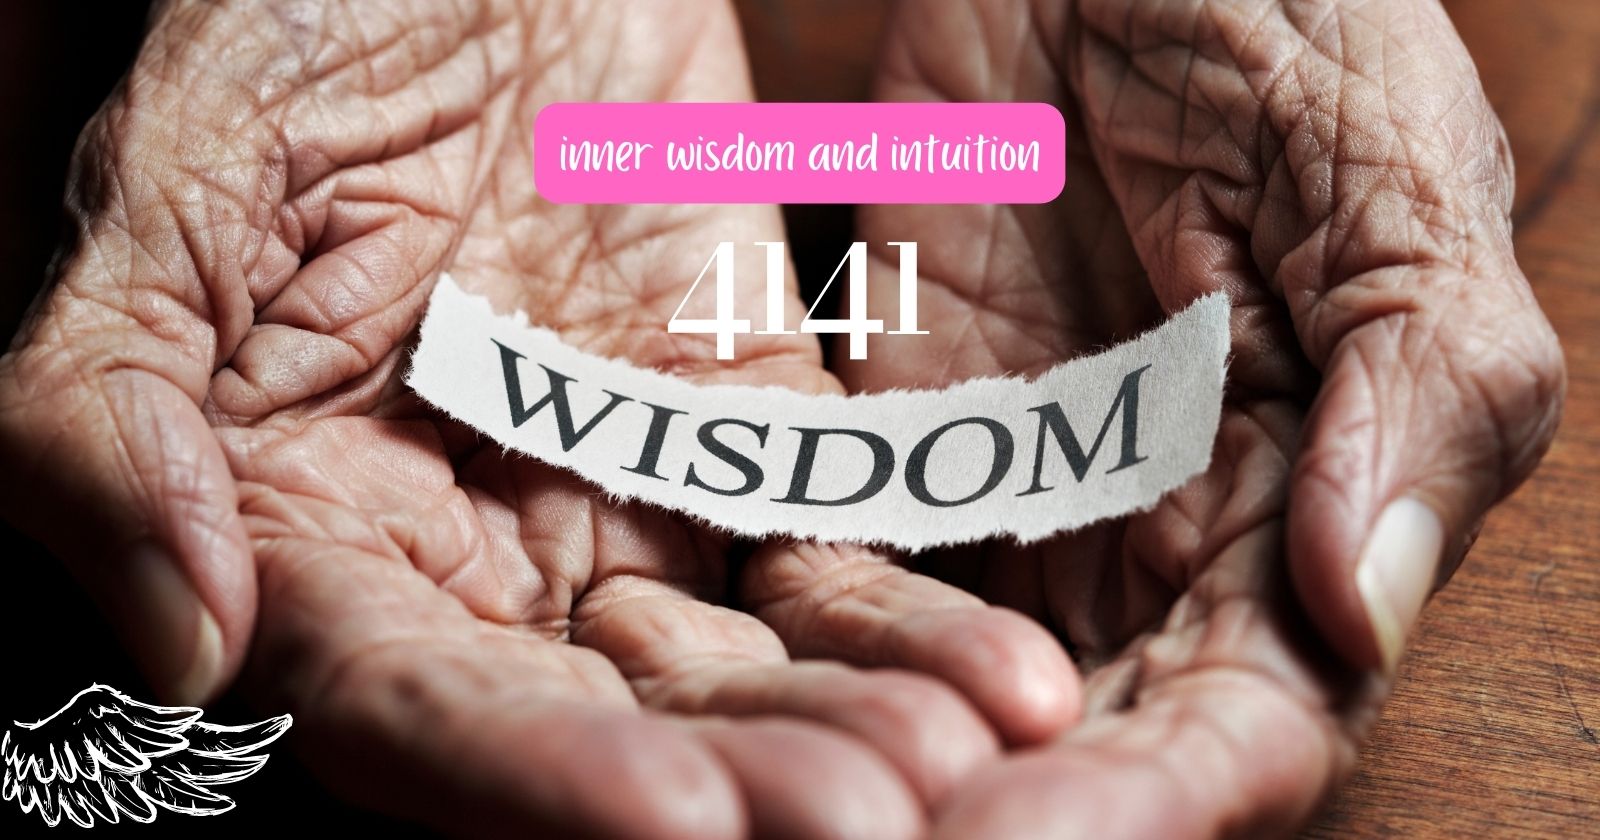 4343: Inner wisdom and intuition